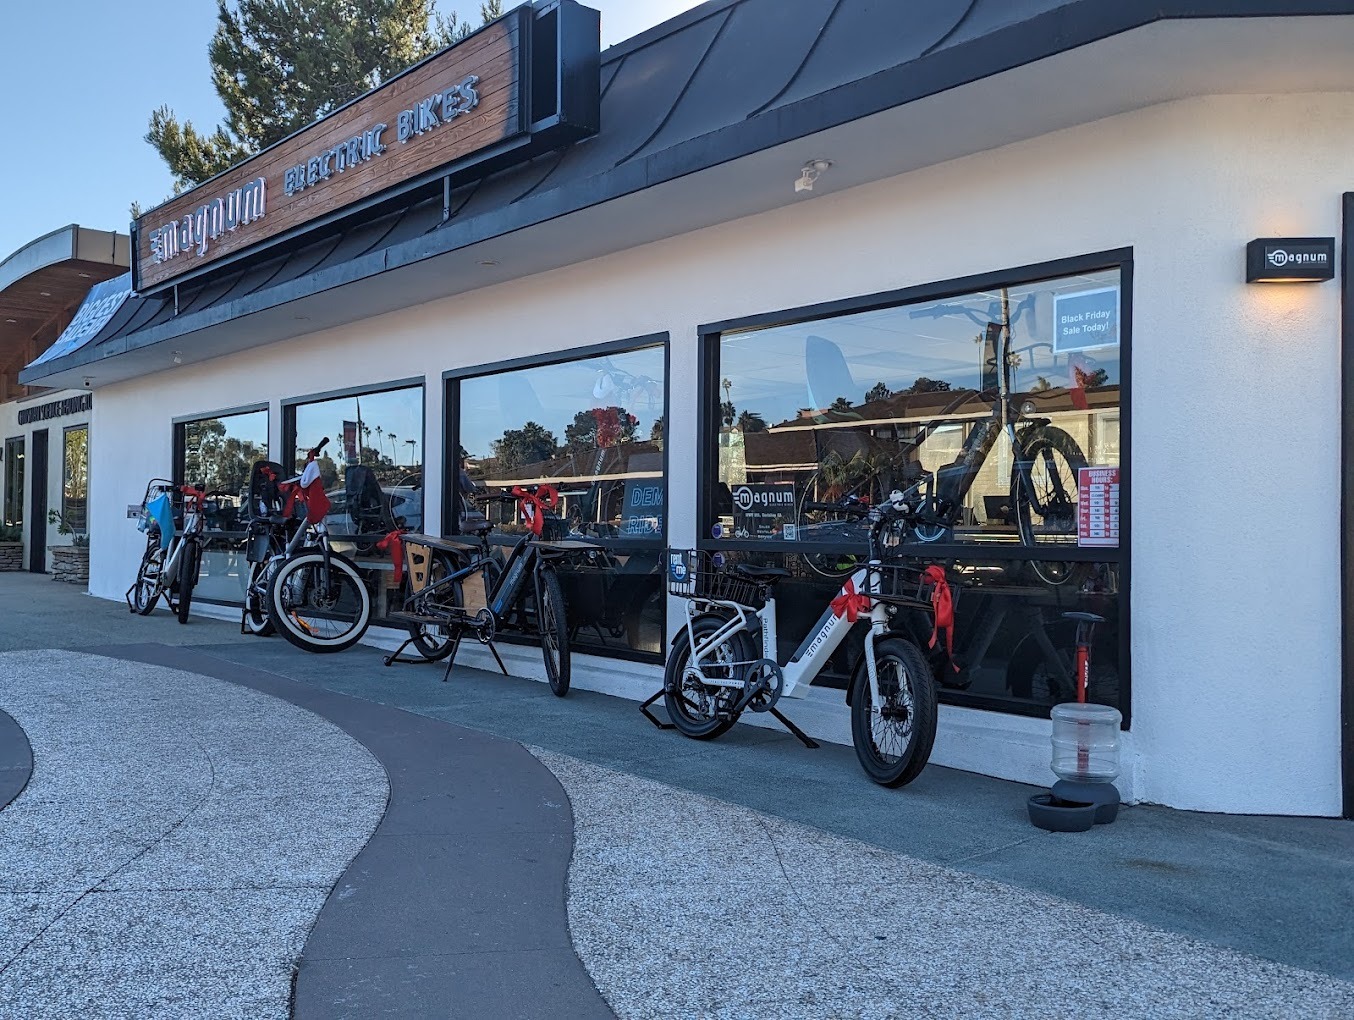 A selection of e-bikes posed in front of the Magnum Bikes flagship store location in Encinitas CA, featuring a cream-colored building exterior with black window frames and a wood background on the electric sign